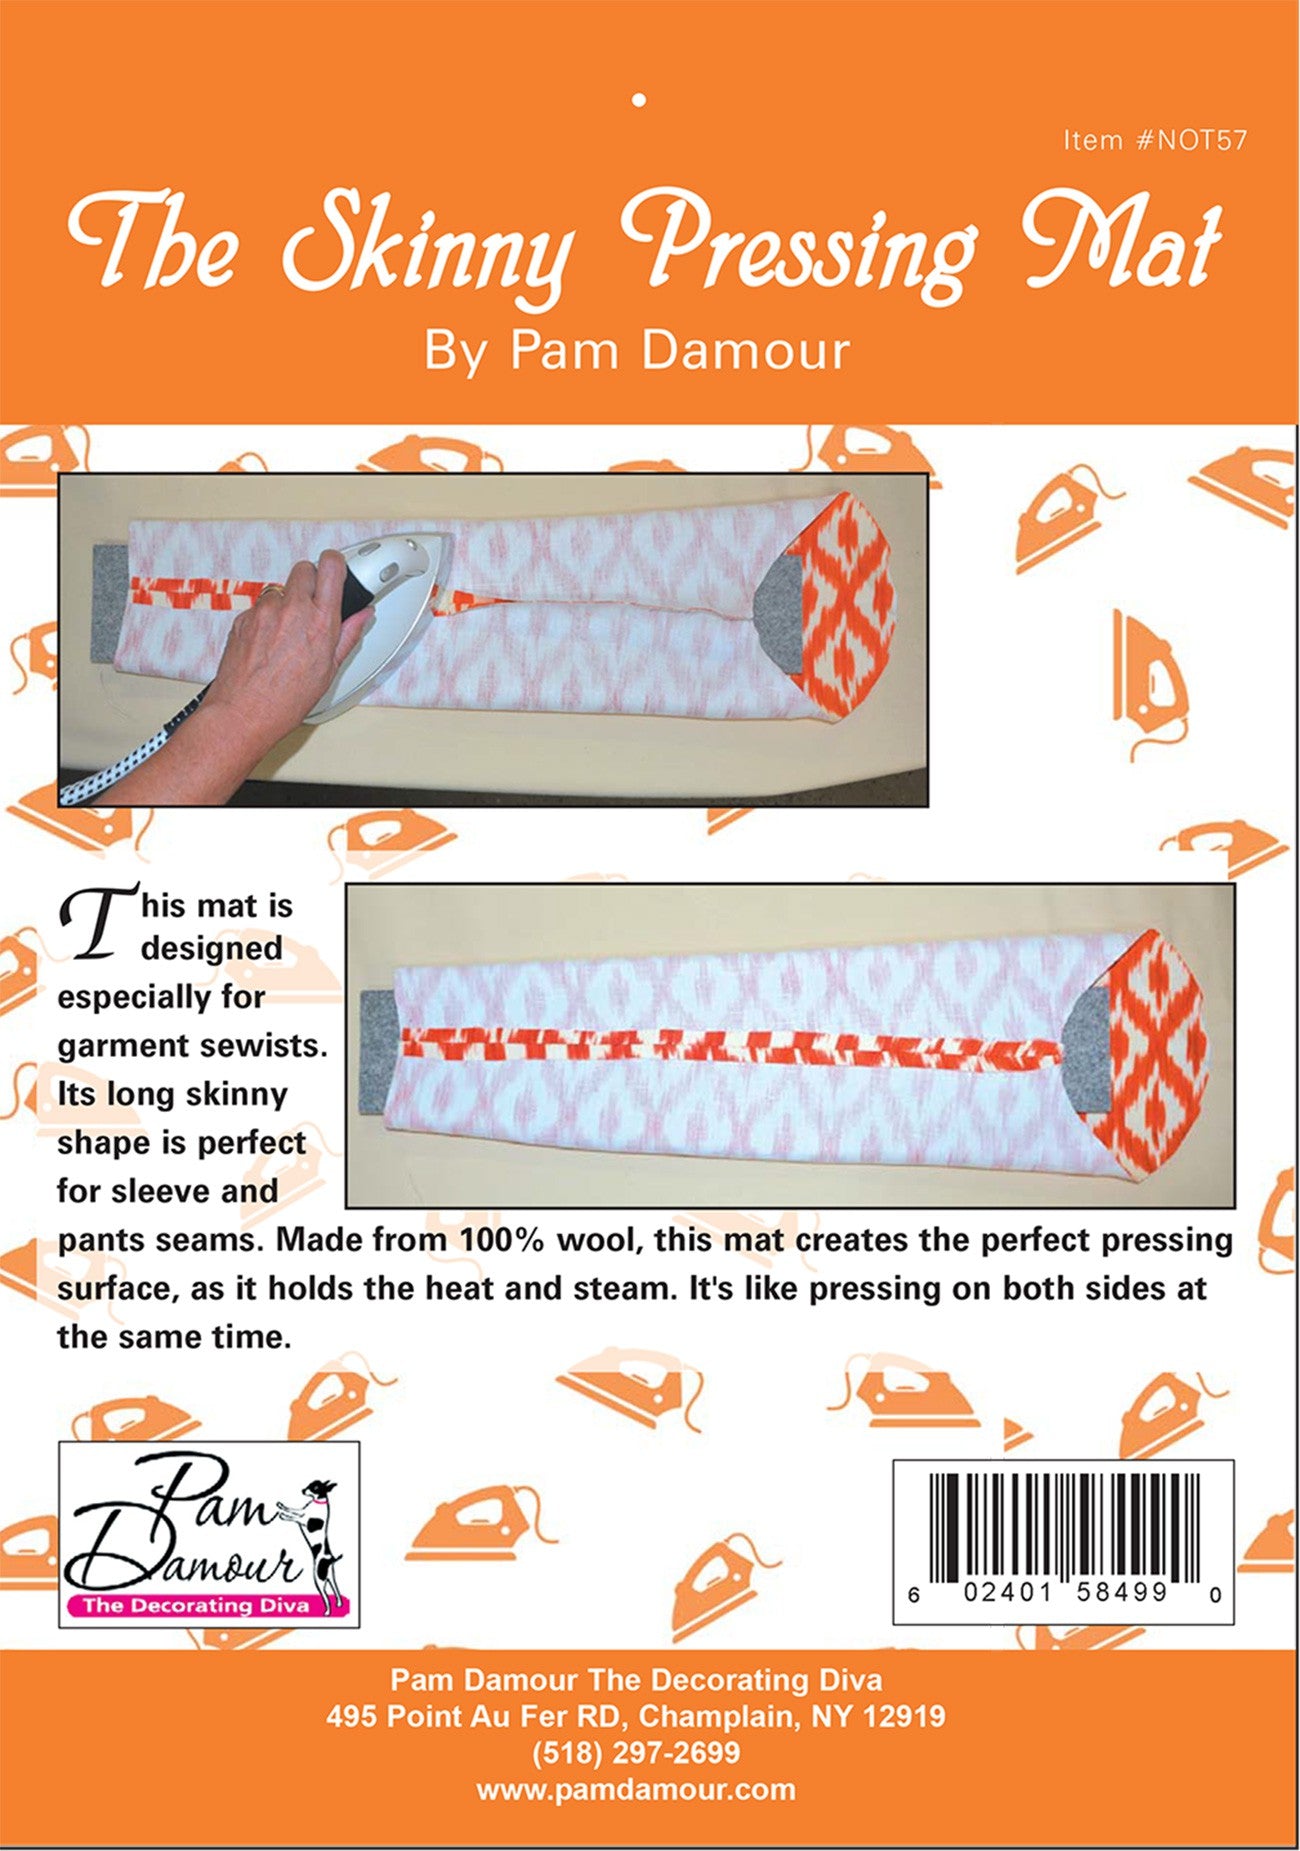 Skinny Pressing Mat 4-Inches x 24-Inches by Pam Damour The Decorating Diva